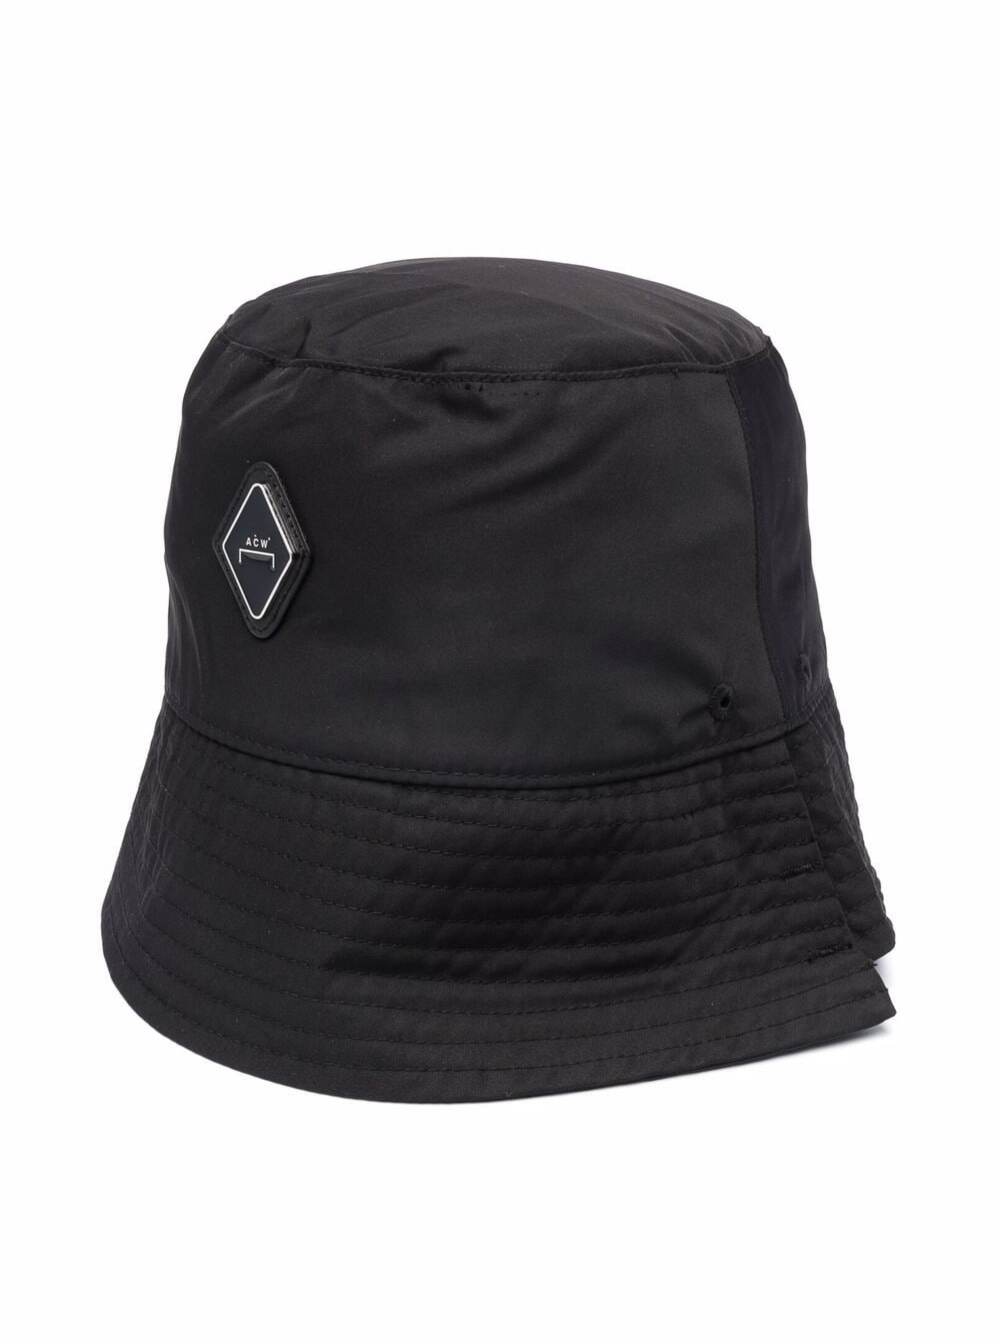 A-COLD-WALL Black Cotton Hat With Logo